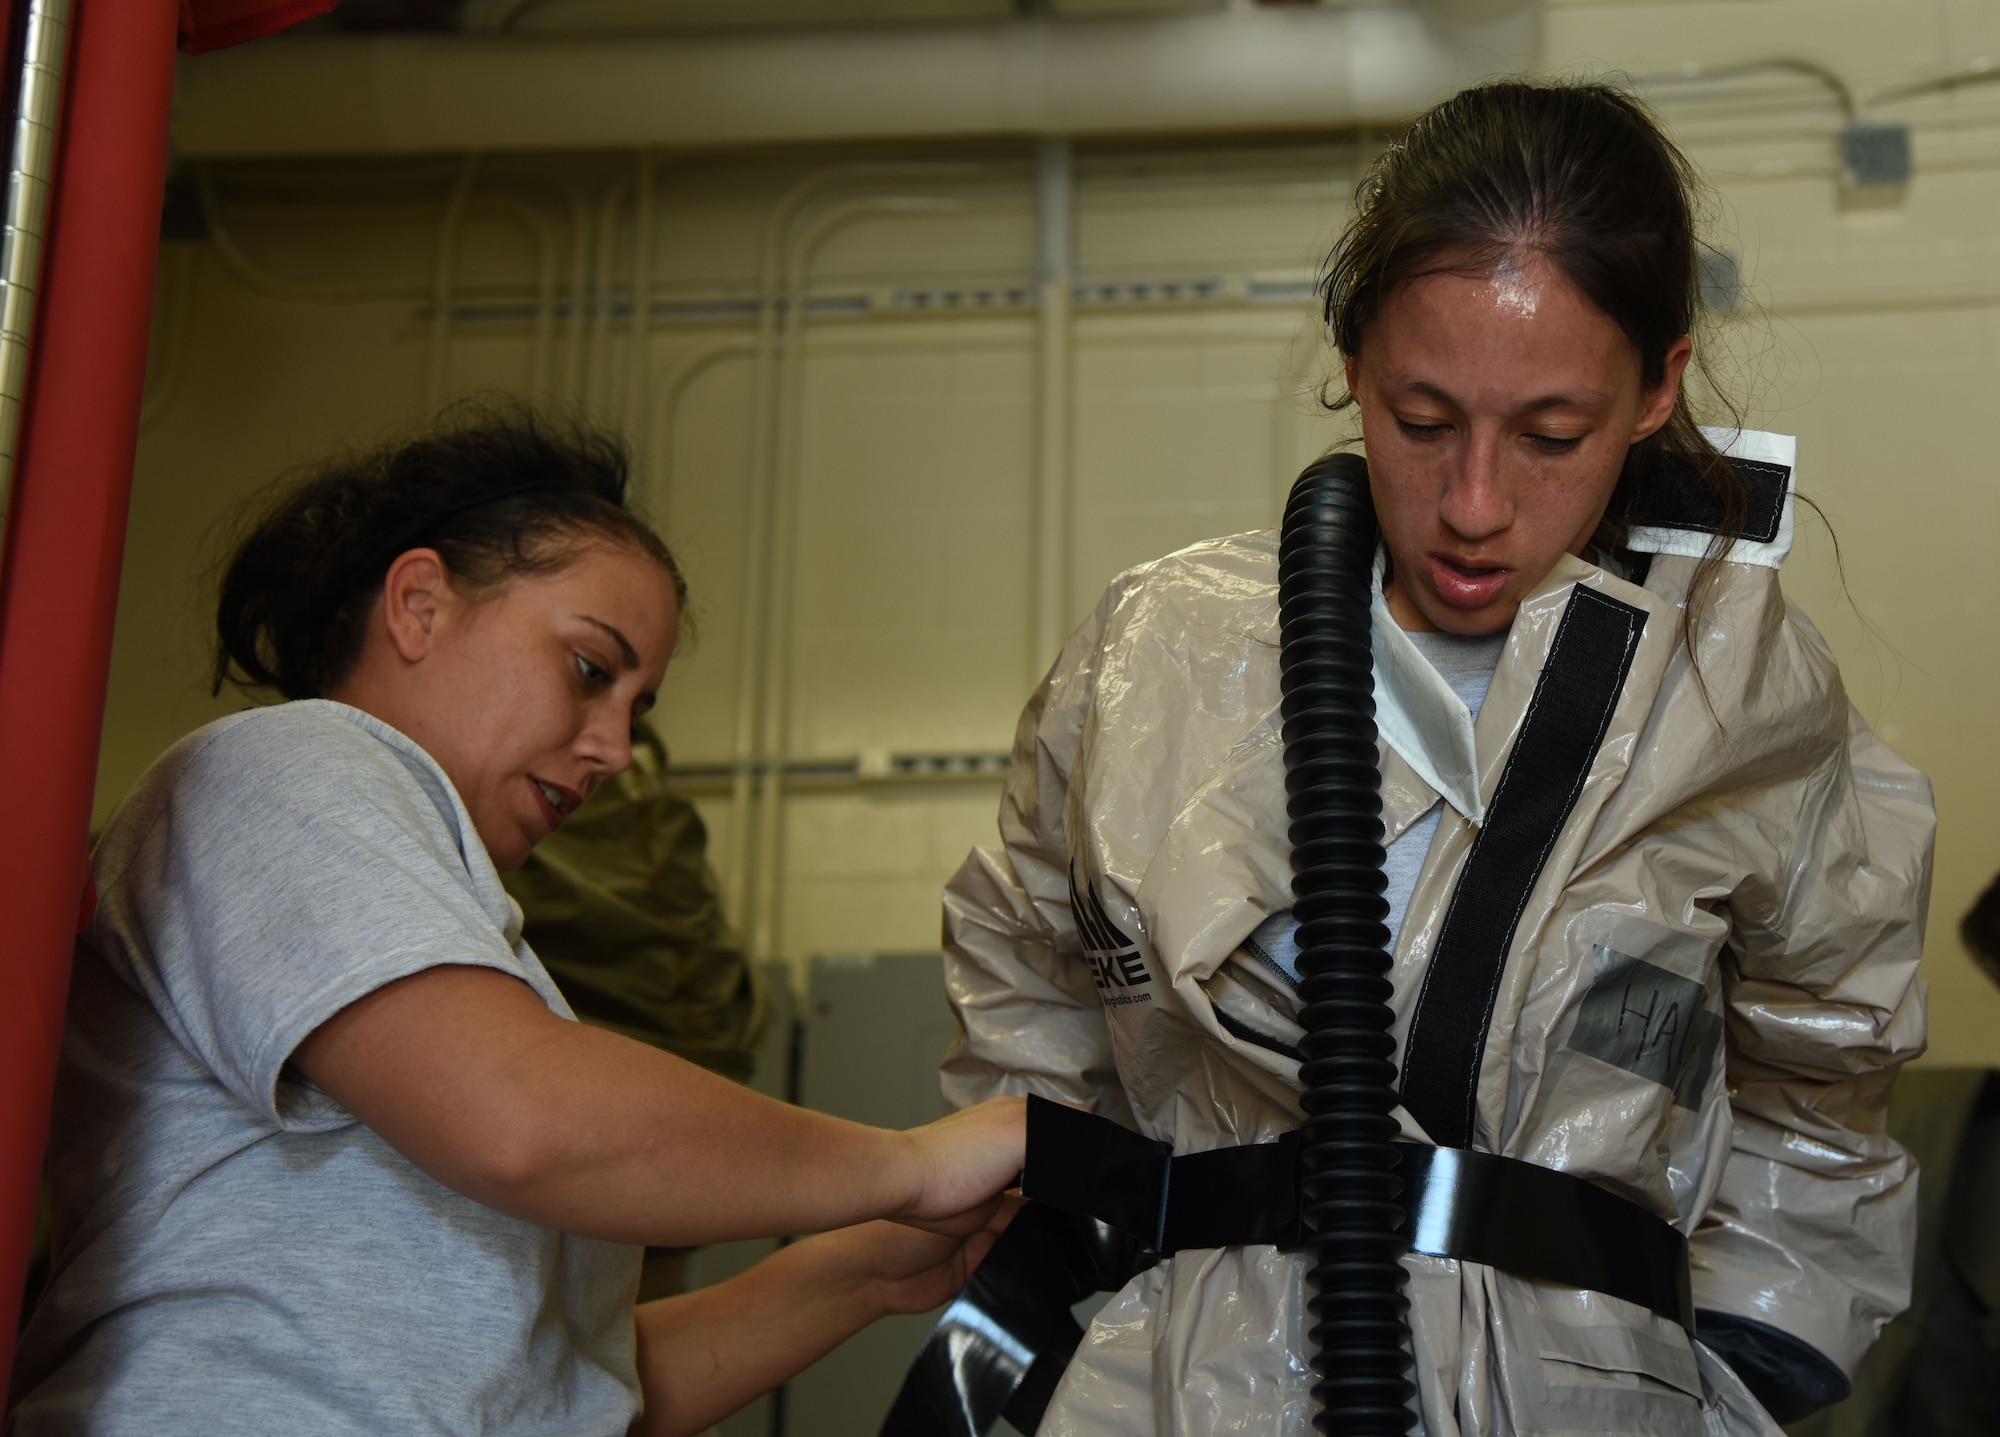 Senior Airman Jessica Knott, 81st Dental Squadron dental lab technician, assists  Senior Airman Anna Halcin, 81st Surgical Operations Squadron medical technician, dress in decontamination gear during the 81st Medical Group integrated in-place patient decontamination training course behind the Keesler Medical Center Sept. 14, 2017, on Keesler Air Force Base, Mississippi. The two-day course trained 21 personnel, which came from four different disaster medical teams: IPPD, triage, manpower and security. Throughout the training, they learned to utilize Keesler’s fixed decontamination facility and how to set up and tear down the decontamination tent. (U.S. Air Force photo by Kemberly Groue)